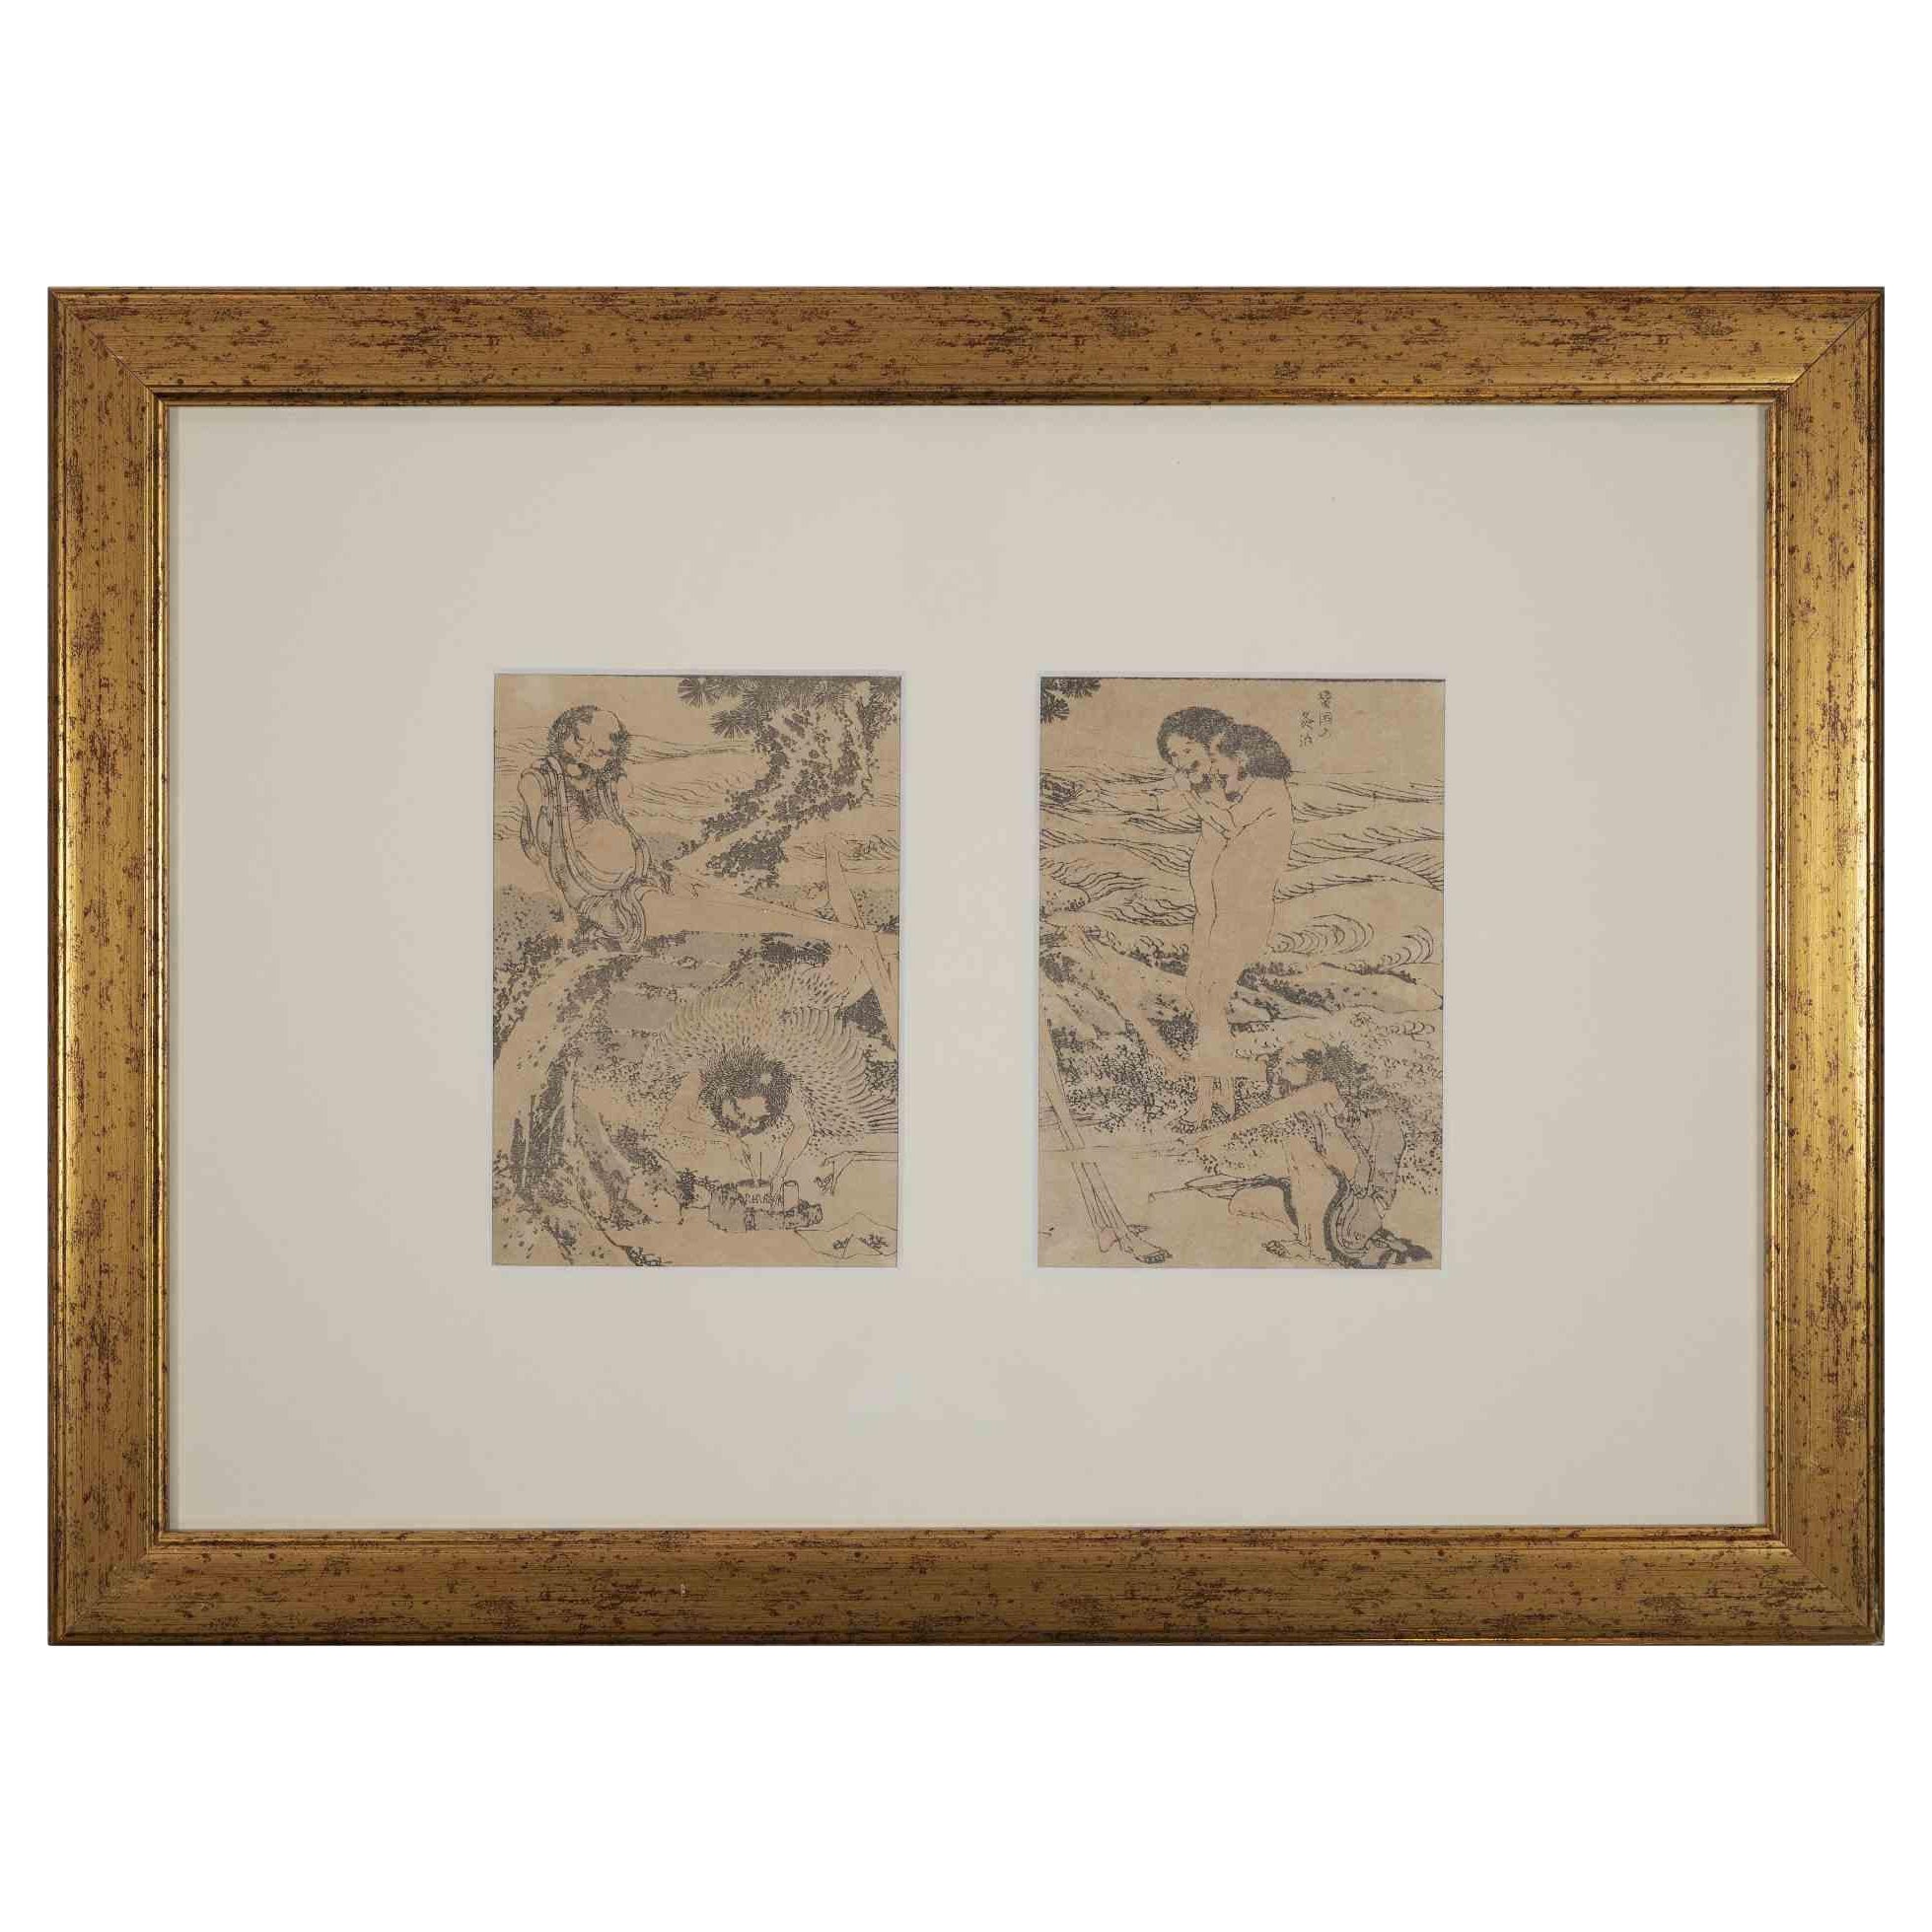 Oriental figures is an original modern artwork realized after Katsushika Hokusai in the late 19th Century.

Black and white woodcut print.

Includes a gilded frame.